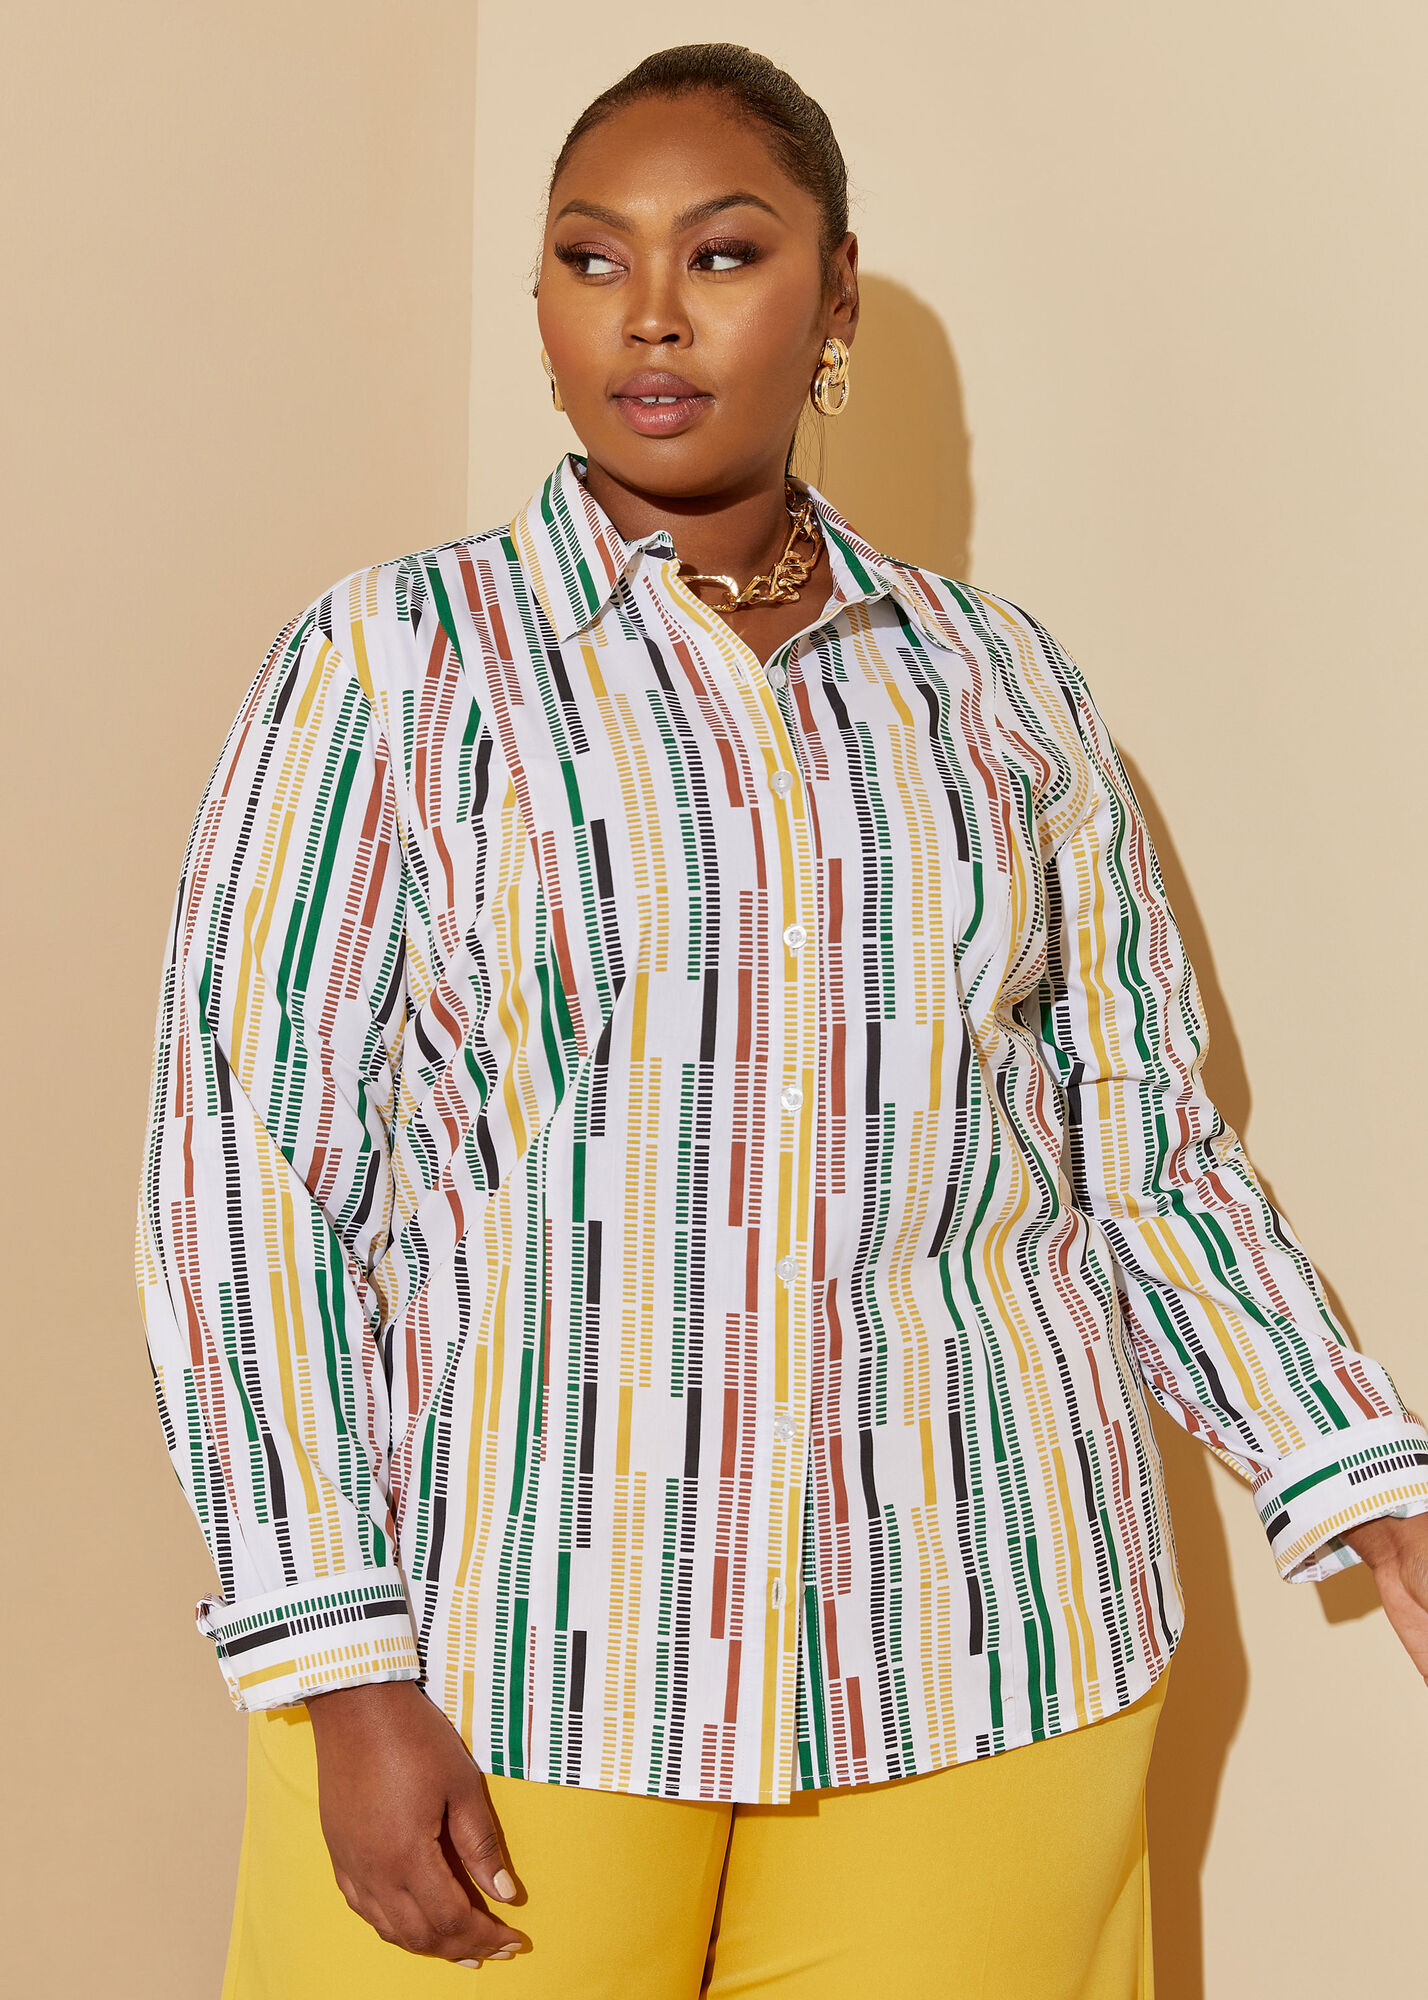 Size striped cotton collared shirt plus size work tops